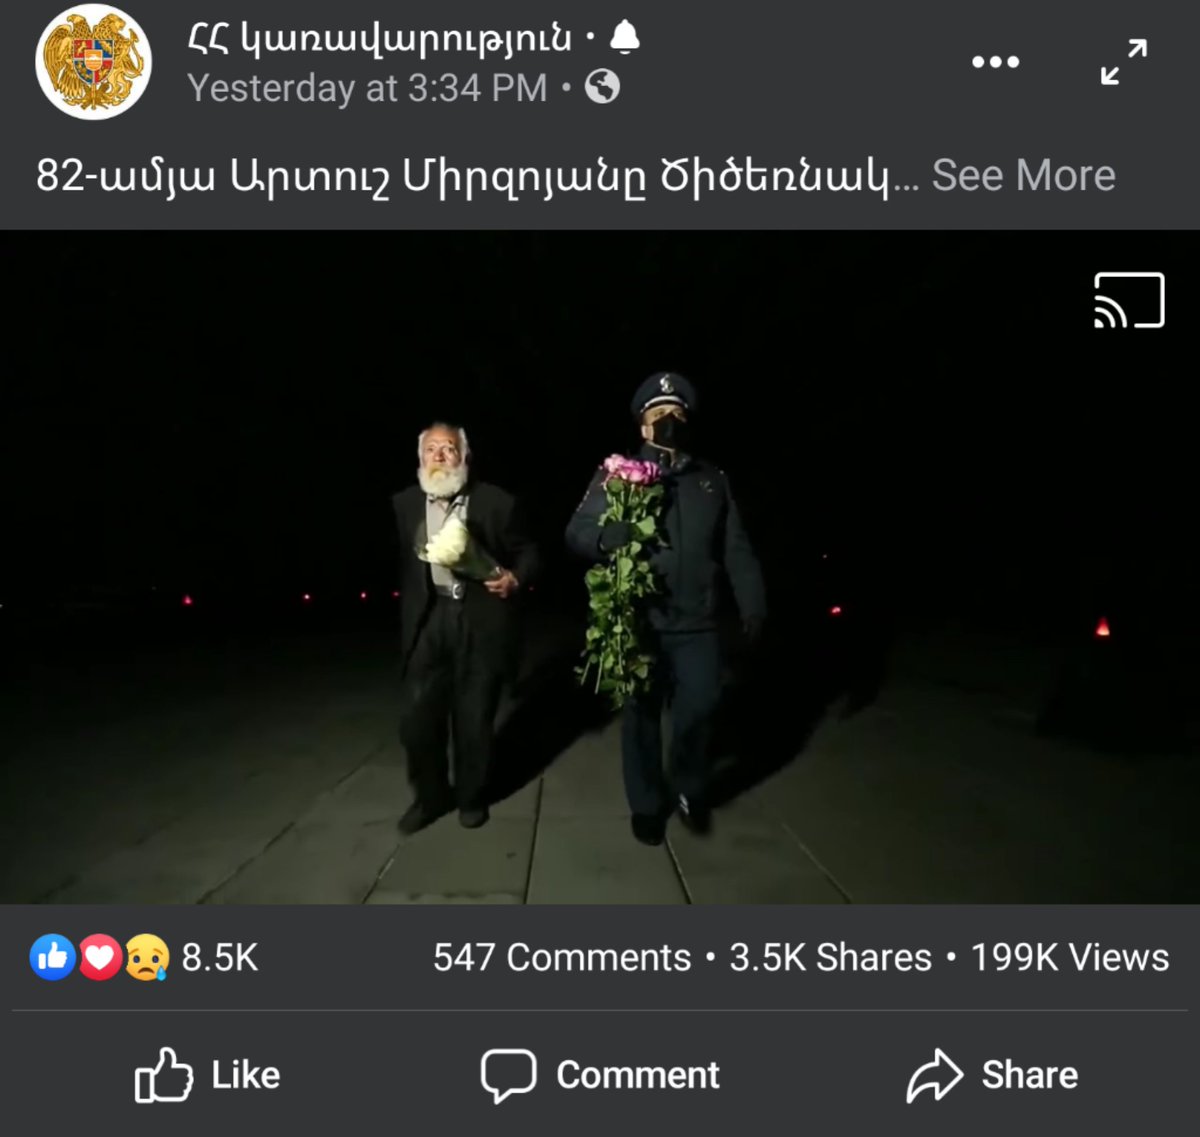 Then miraculously he was found and at 3am on April 25 he was allowed to go up ceremoniously with professional cameras rolling and a choir singing. Imagery shared on govt soc media channels https://www.facebook.com/1378368079150250/posts/2618702875116758/3/